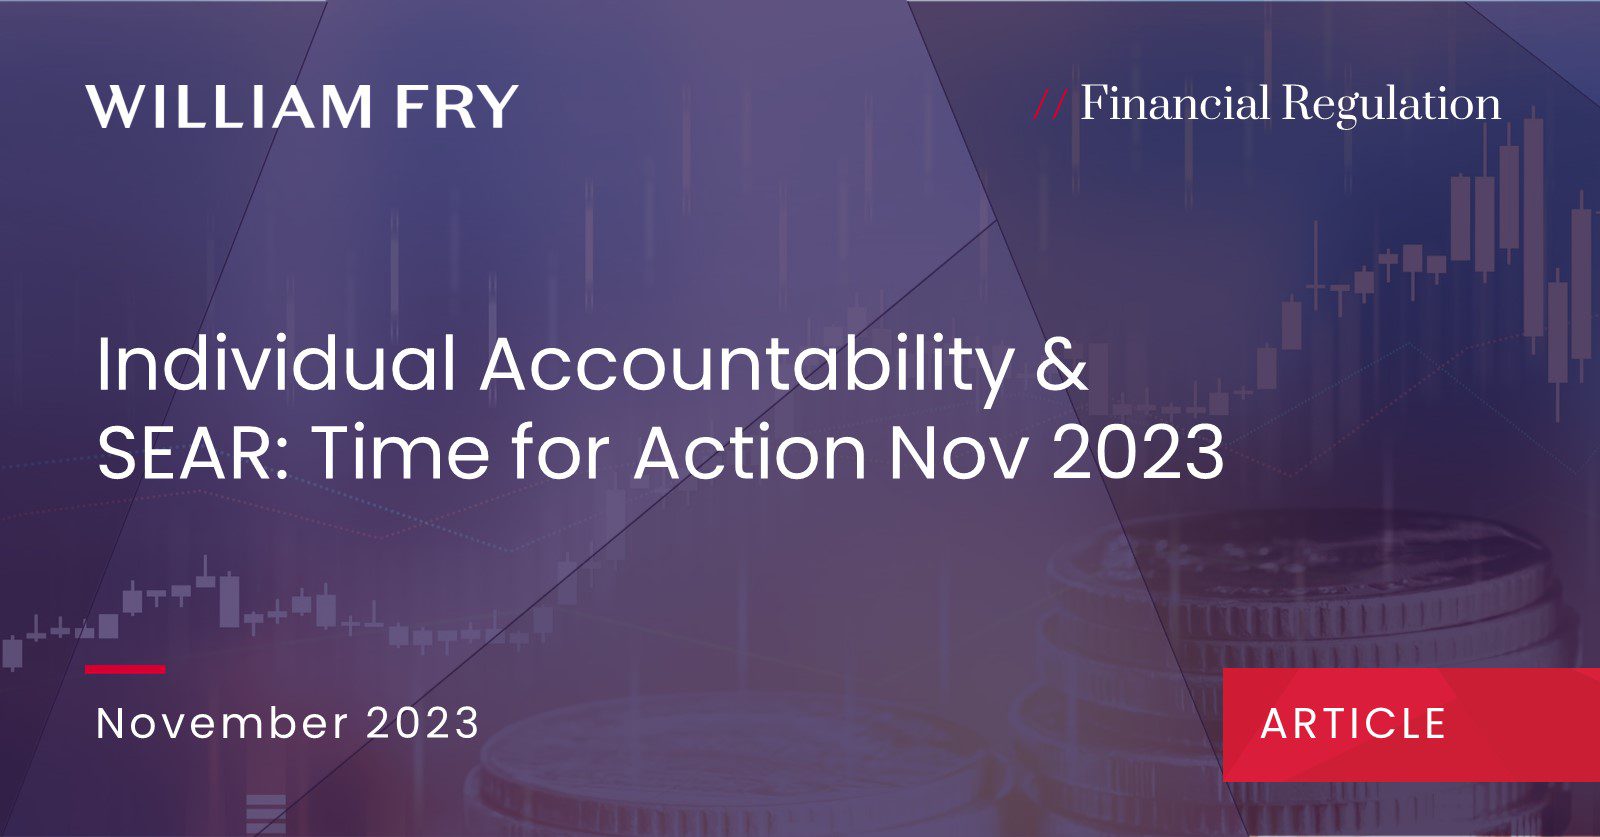 Individual Accountability & SEAR: Time for Action Nov 2023